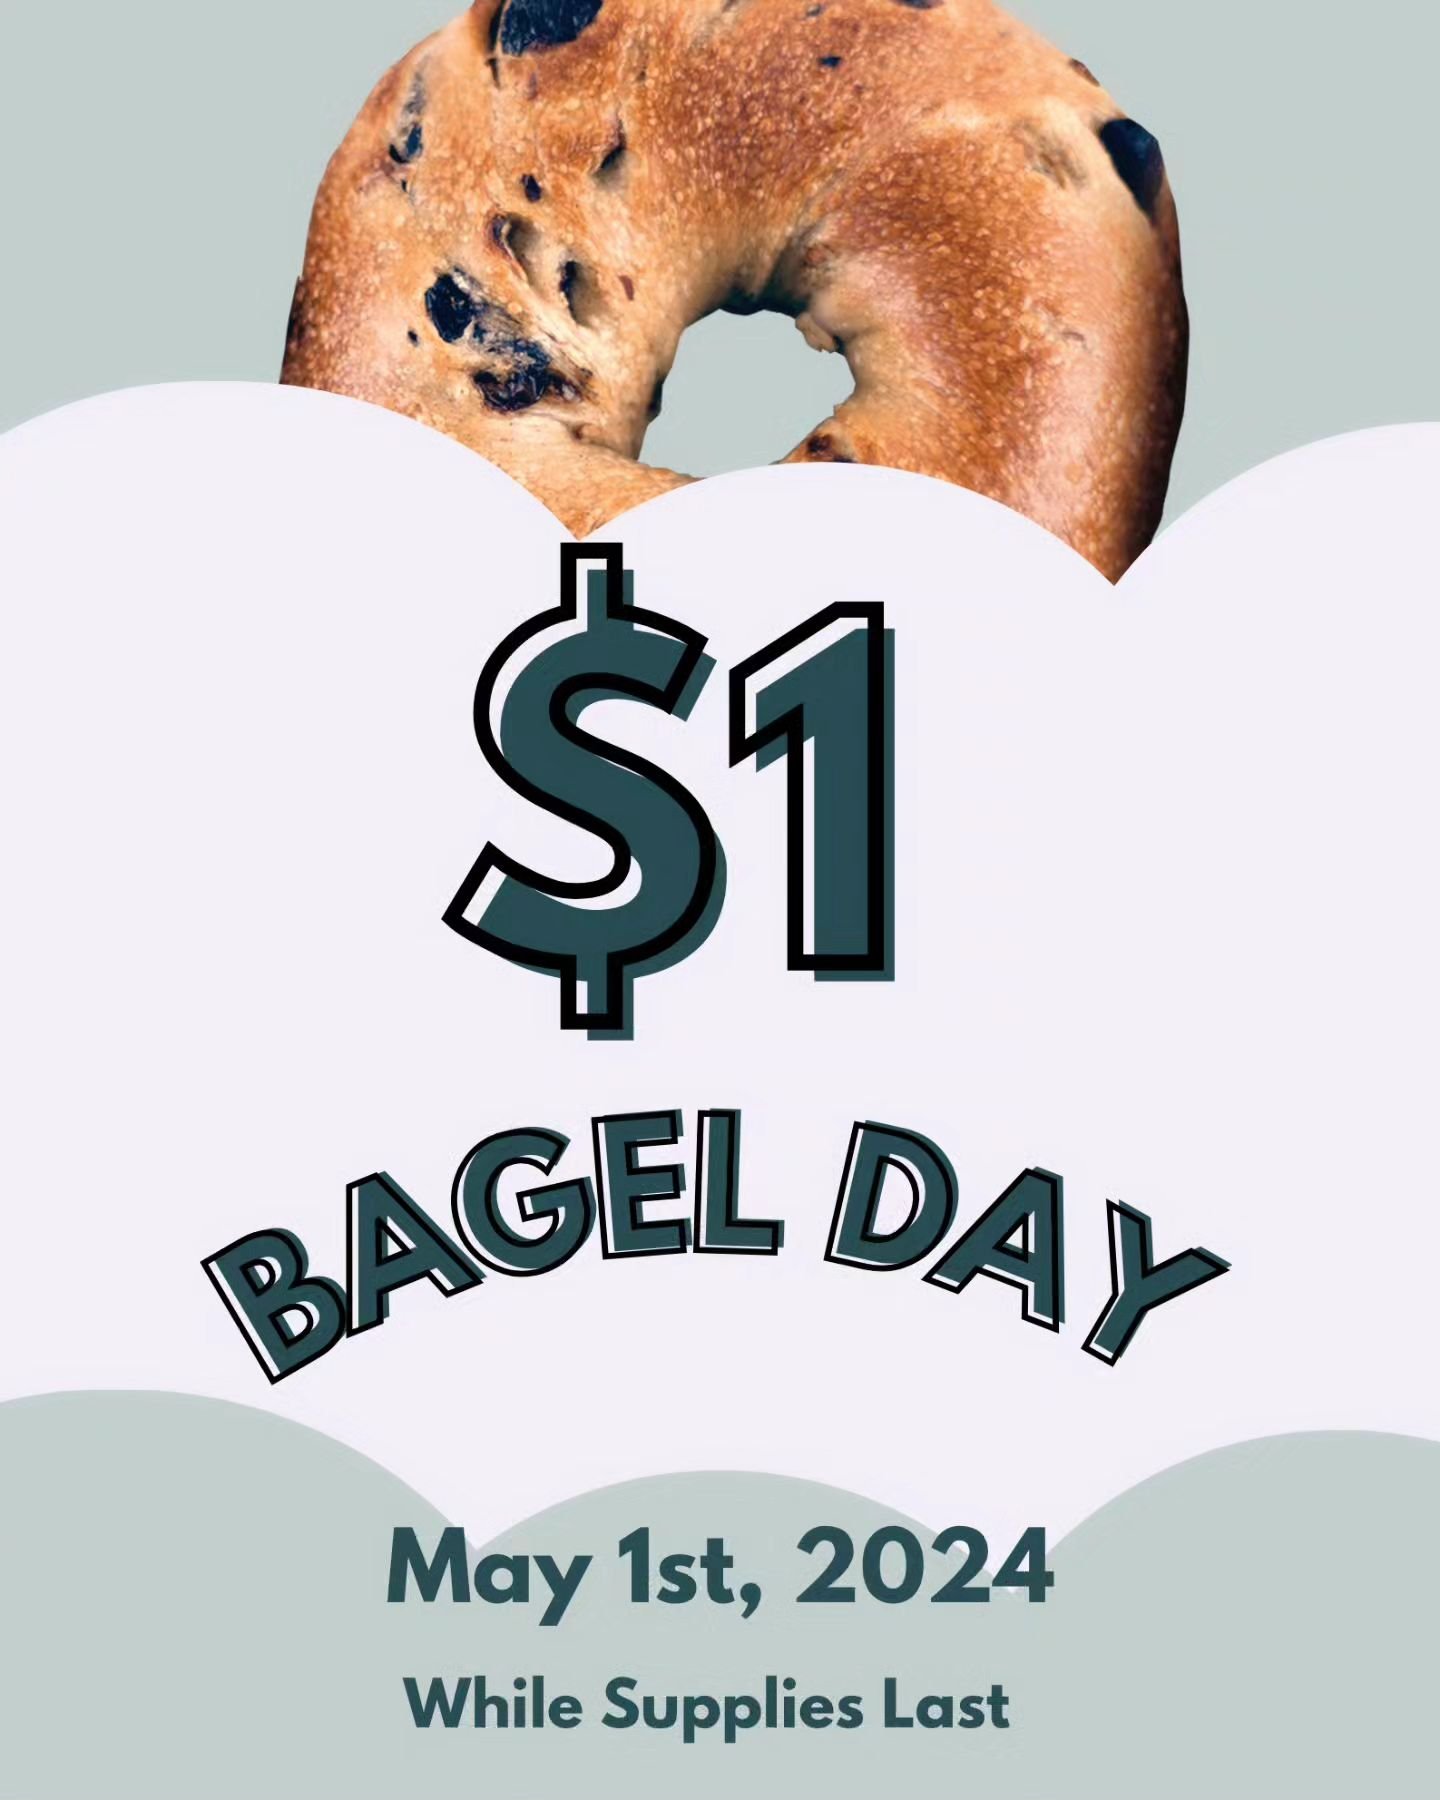 Today is $1 Bagel Day!! Come in and grab a coffee with your bagel! Open today 8 to 5!